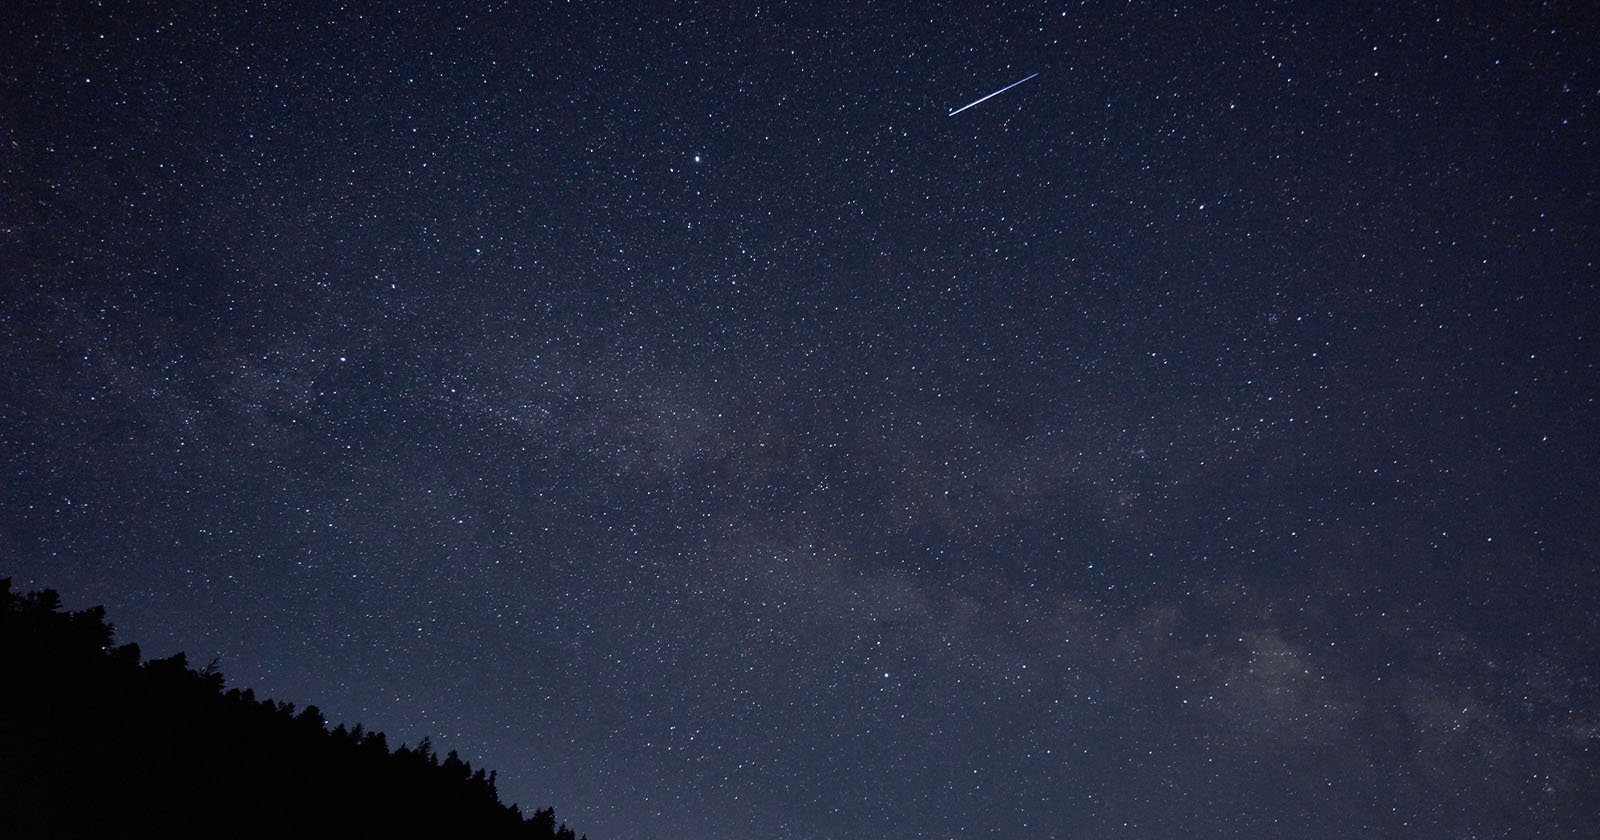 The Leonid Meteor Shower Peaks This Weekend, Heres How to Photograph It